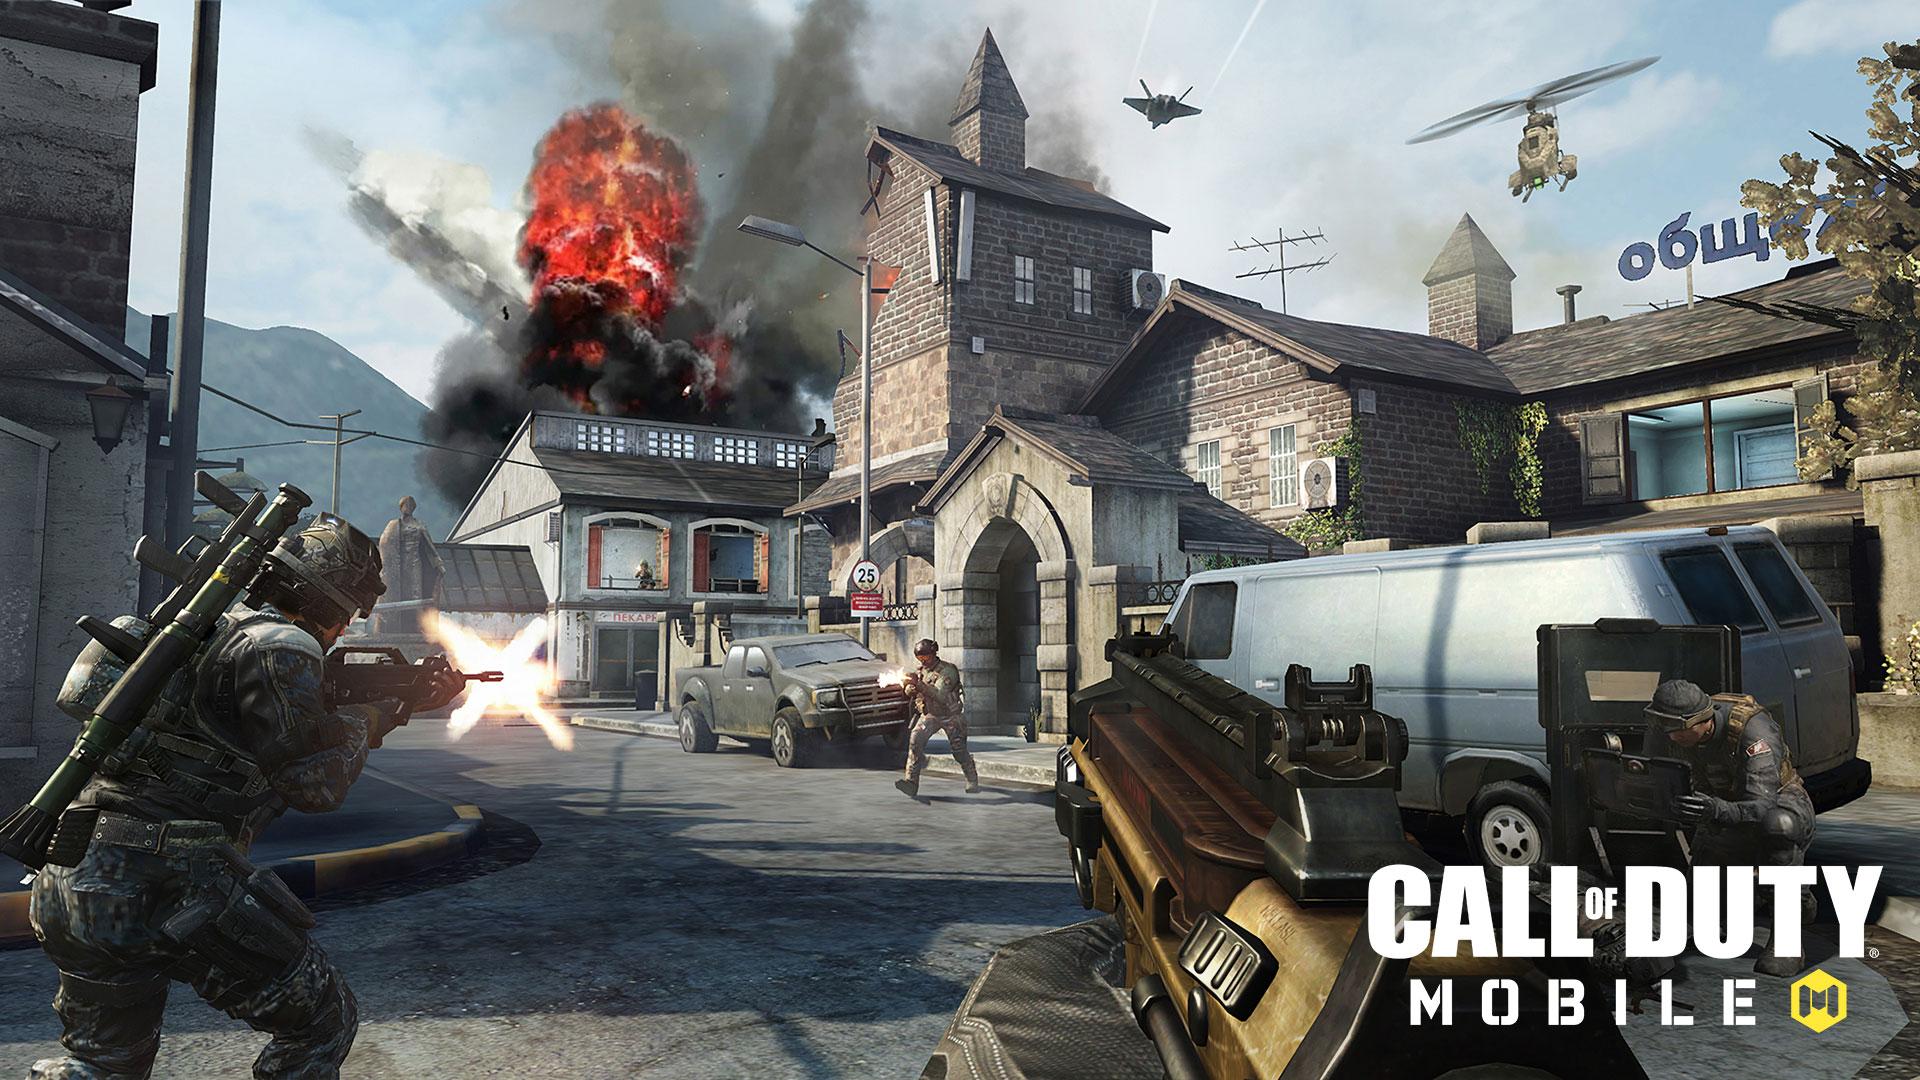 The full Call of Duty franchise is coming to mobile and the iOS beta is launching next week